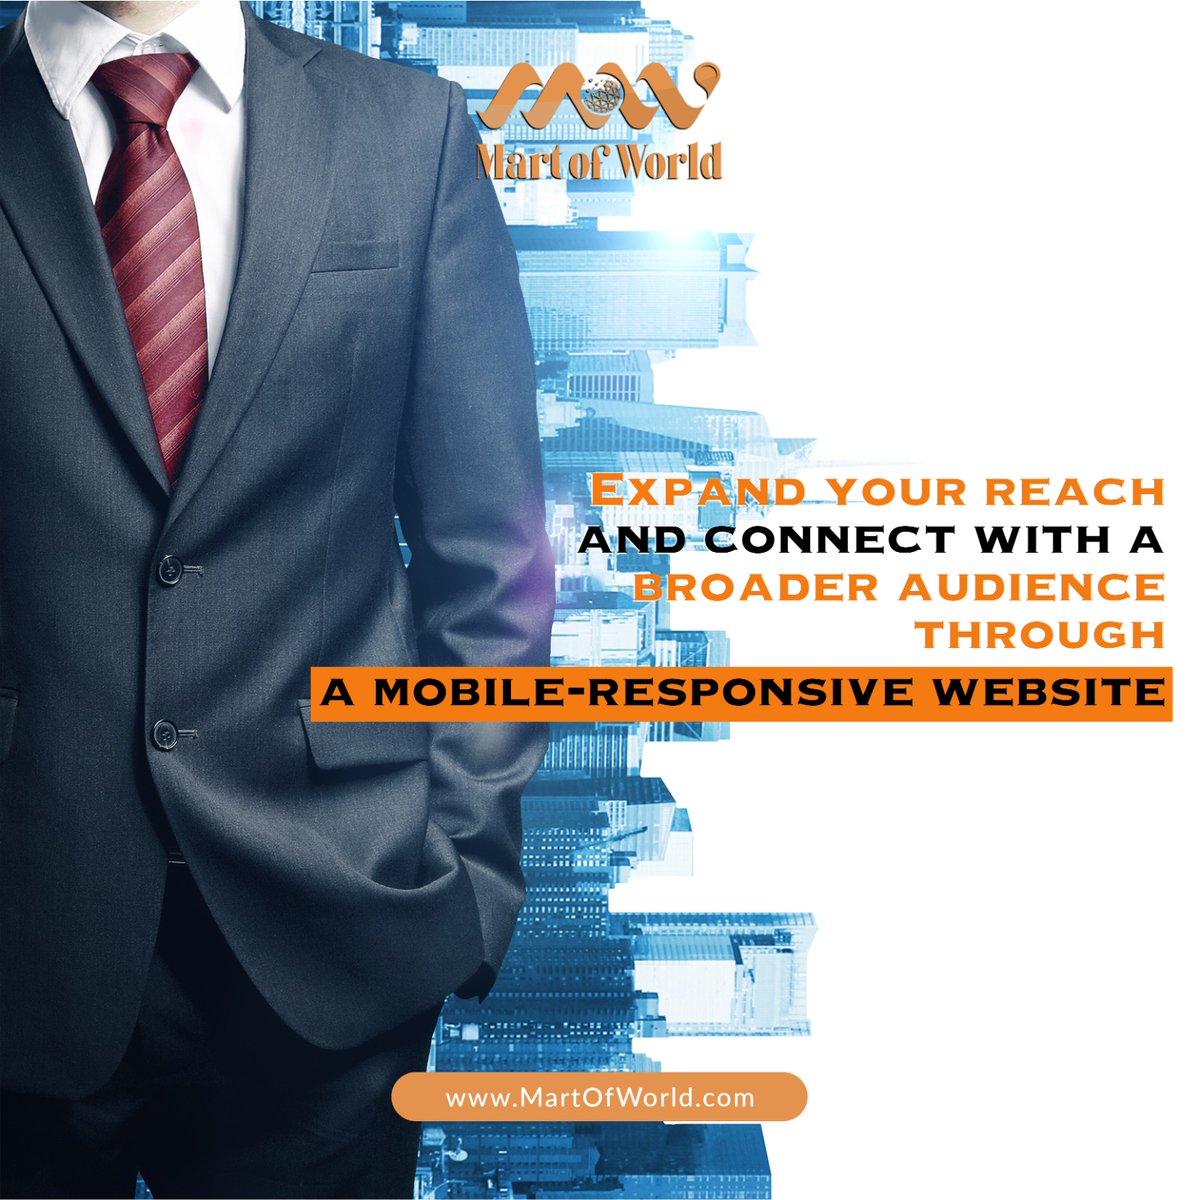 📷Expand your reach and connect with a broader audıence through a mobile-responsive website
📷martofworld.com/company-listin…
#B2BConnections
#BusinessToBusiness
#B2BNetworking
#B2BPartnerships
#B2BSuccess
#B2BMarketing
#B2BCommerce
#B2BGrowth
#B2BStrategy
#B2BCollaboration
#B2BIndustry